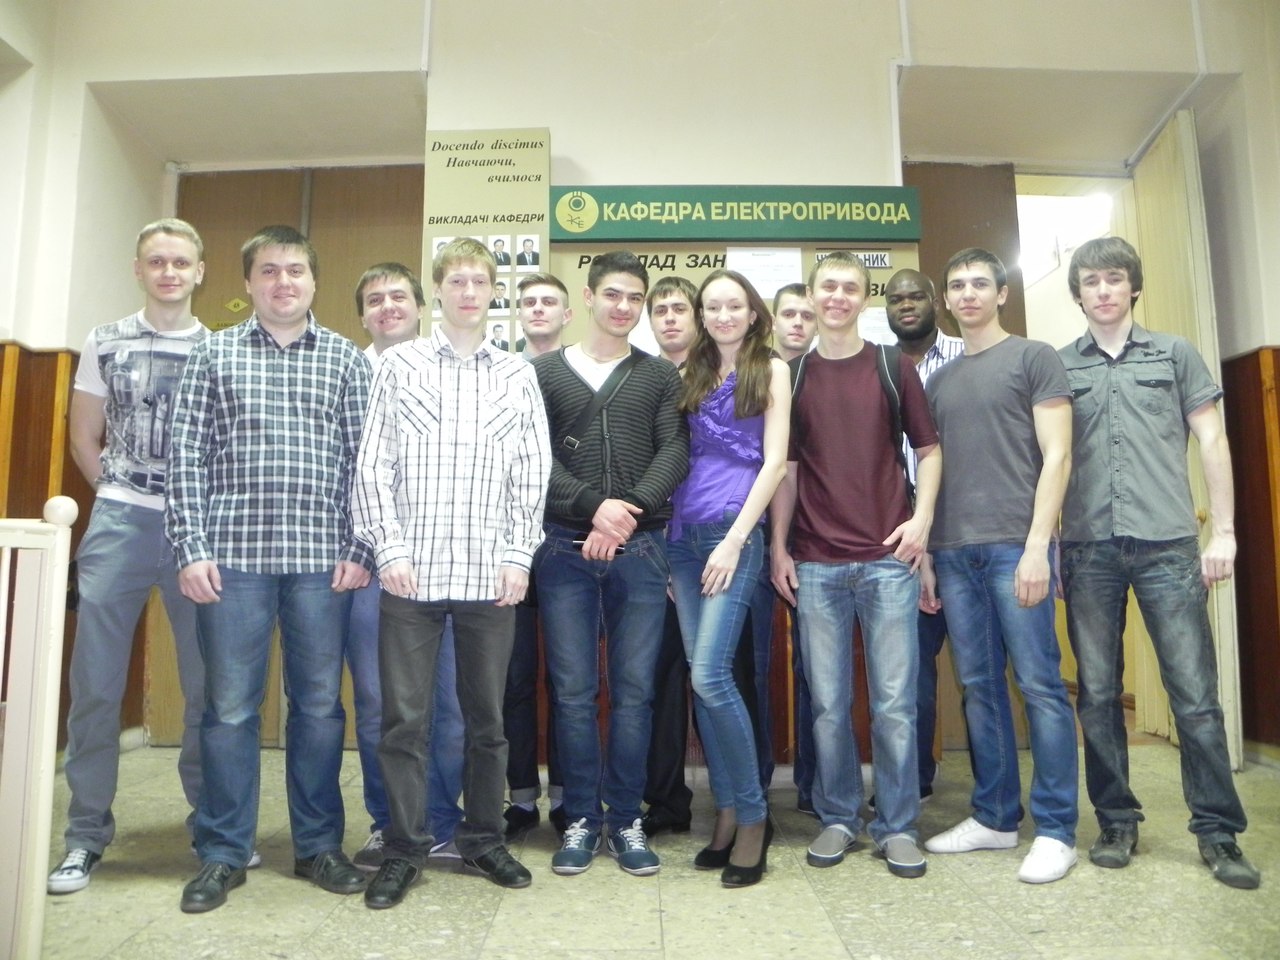 ЕМ-09-3. The first group with courses taught in English